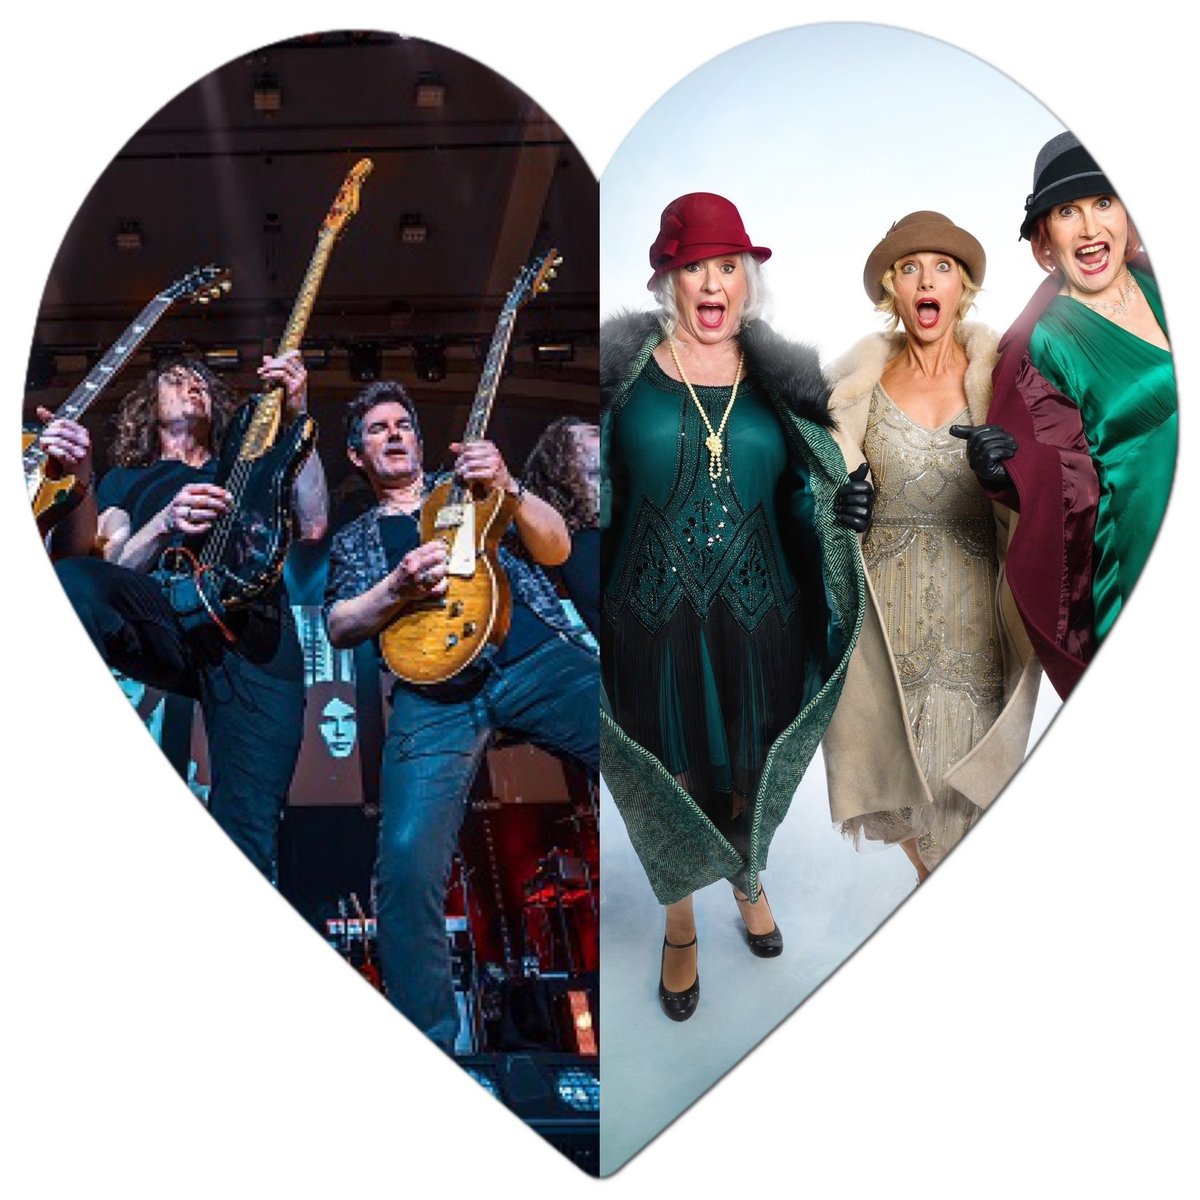 Valentine Ideas! Whether you're treating someone, or you need a night out with pals there's two great shows at the Congress for some night out inspiration Fascinating Aida (QUICK selling fast) bit.ly/3OqQ2Hc Classic Rock Show here bit.ly/3u1qcSV #ValentinesDay